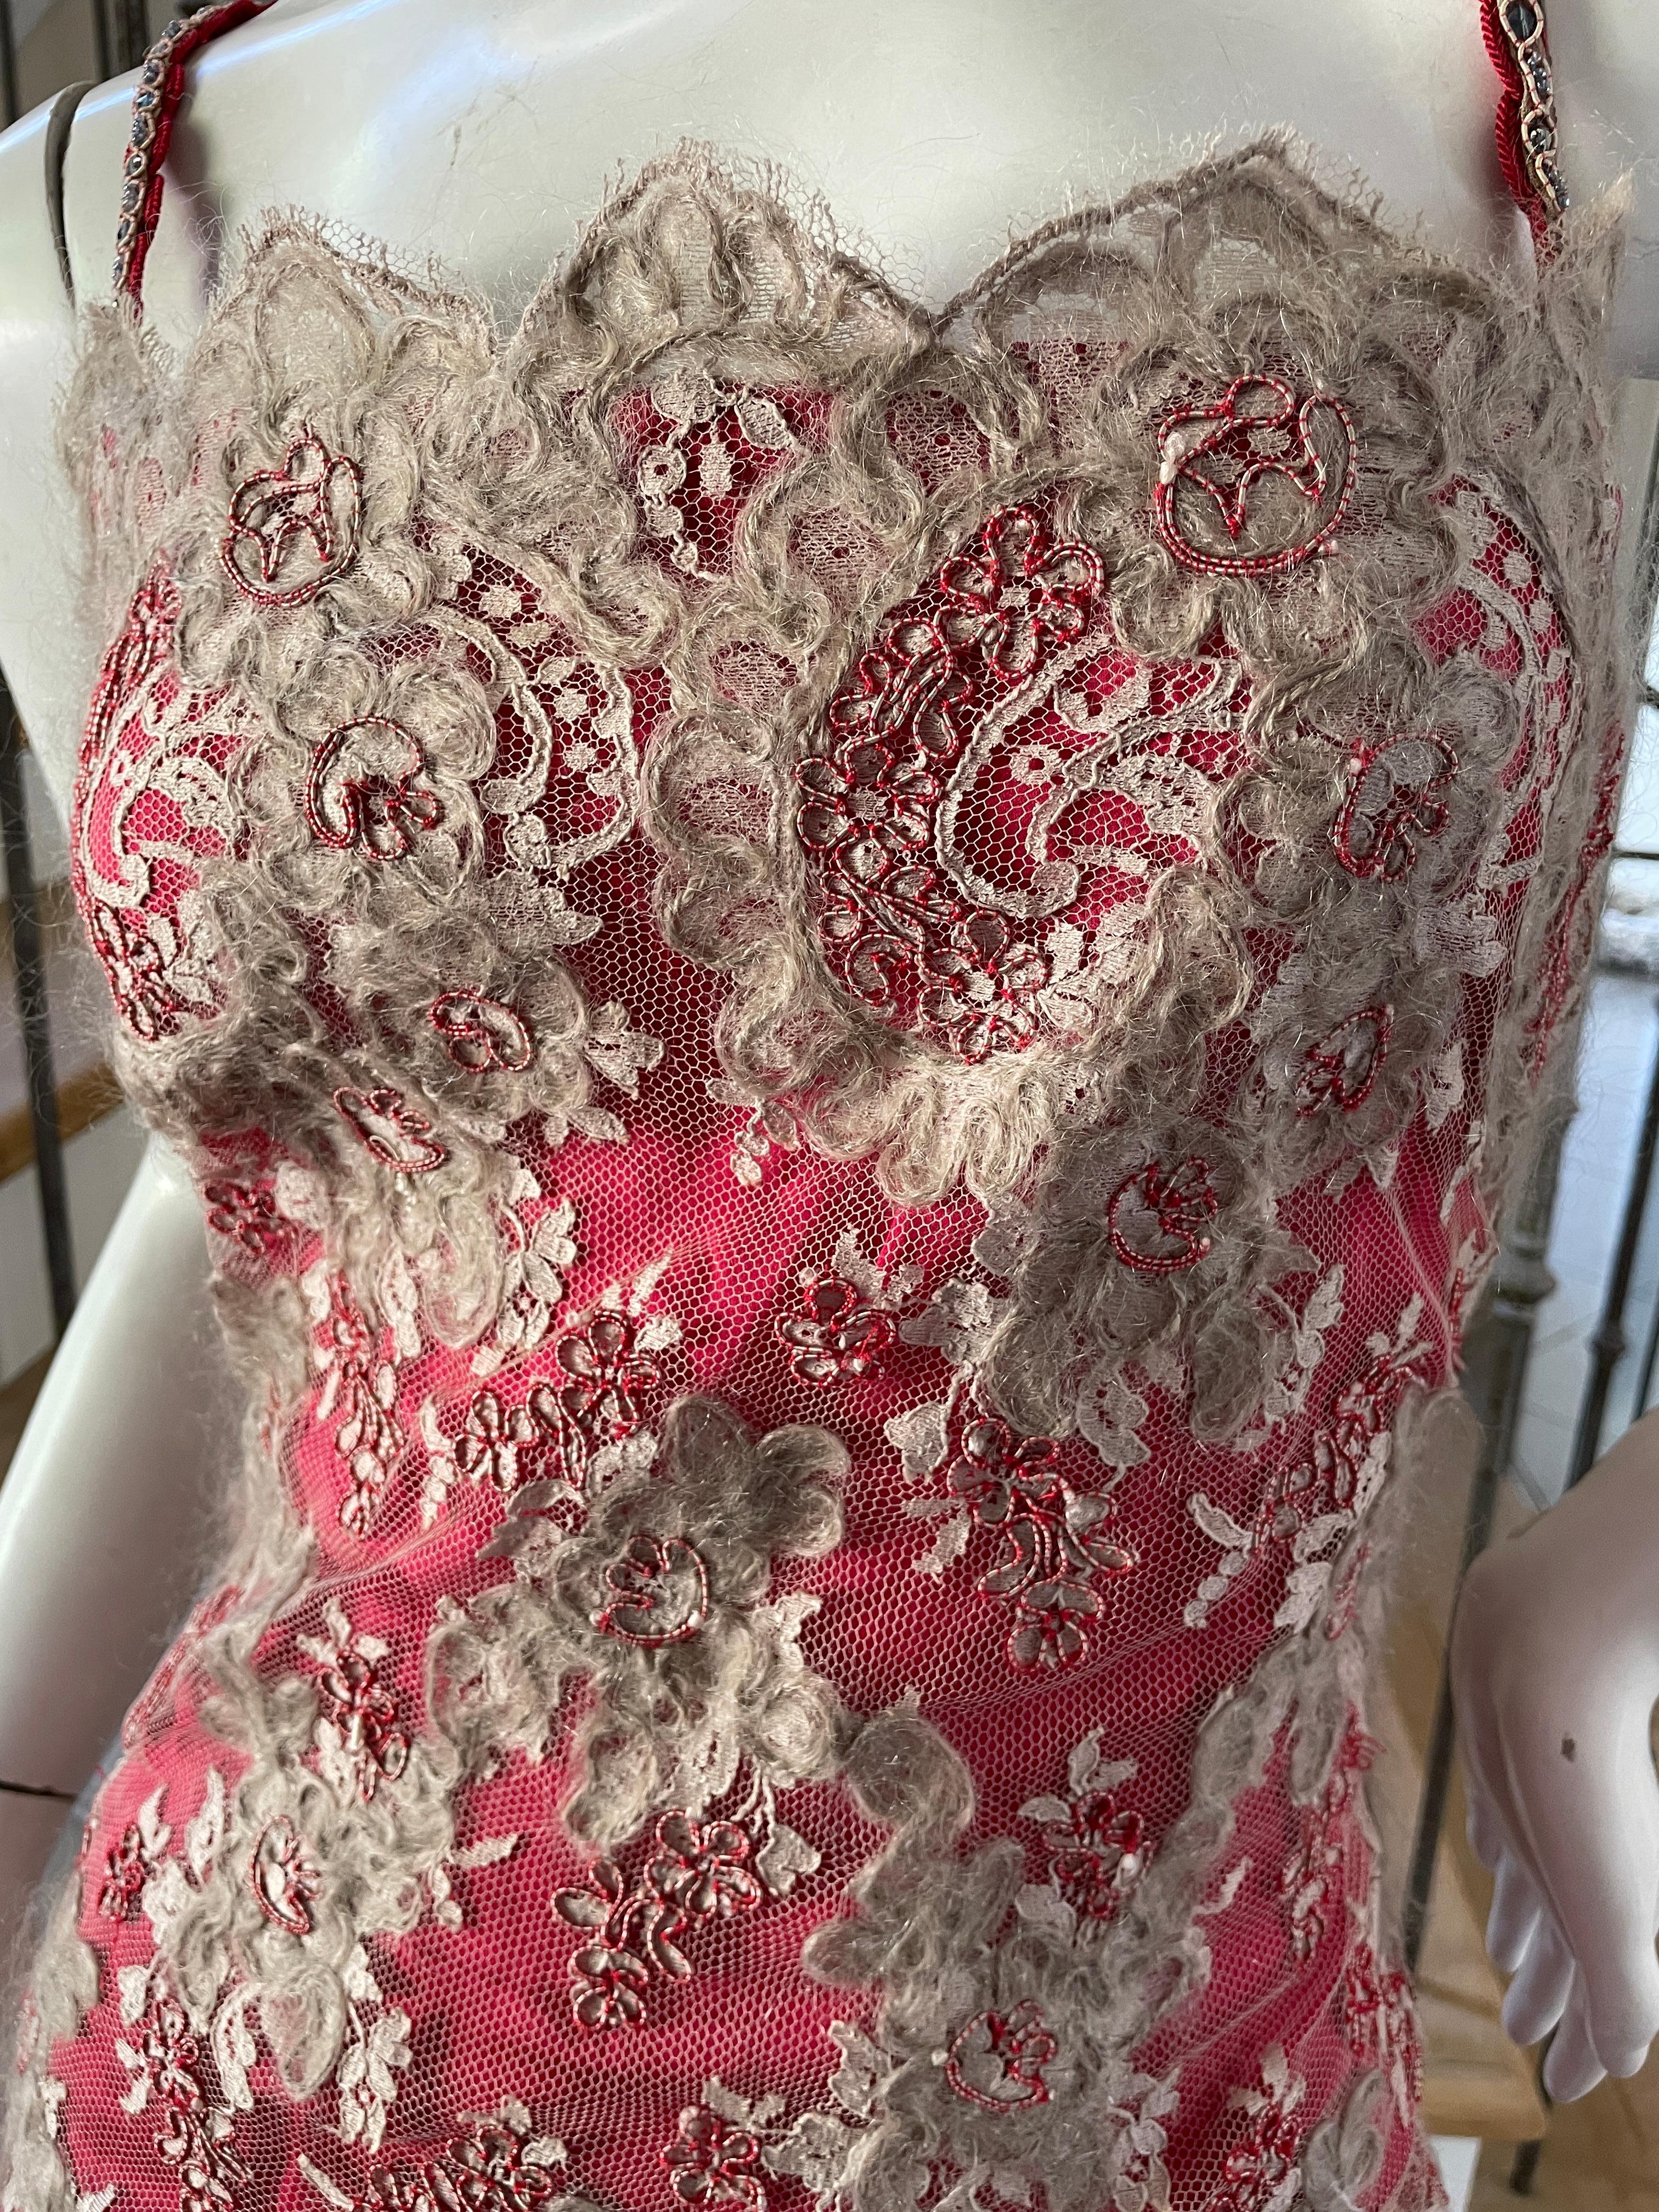 Bill Blass for Bergdorf Goodman Vintage Pink Embellished Lace Cocktail Dress NWT For Sale 2